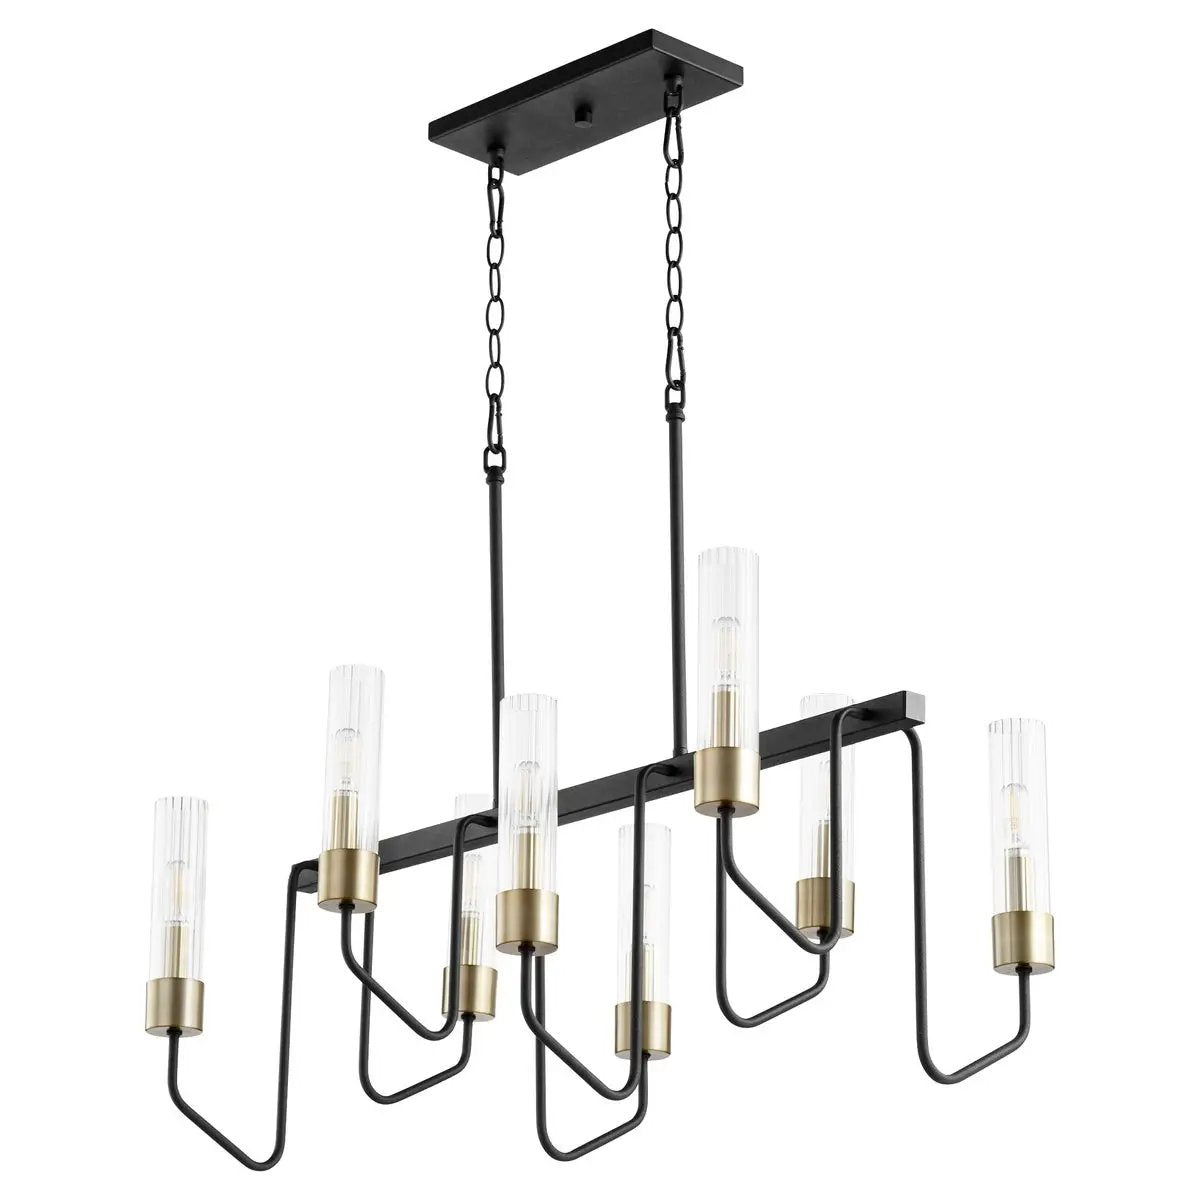 Transitional island lighting with clear glass tubes and a black rectangular object. Perfect for mid-century modern design in dining rooms or kitchens. Adjustable suspension system. UL Listed for damp locations. 60W, 8 bulbs (not included). 2-year warranty.